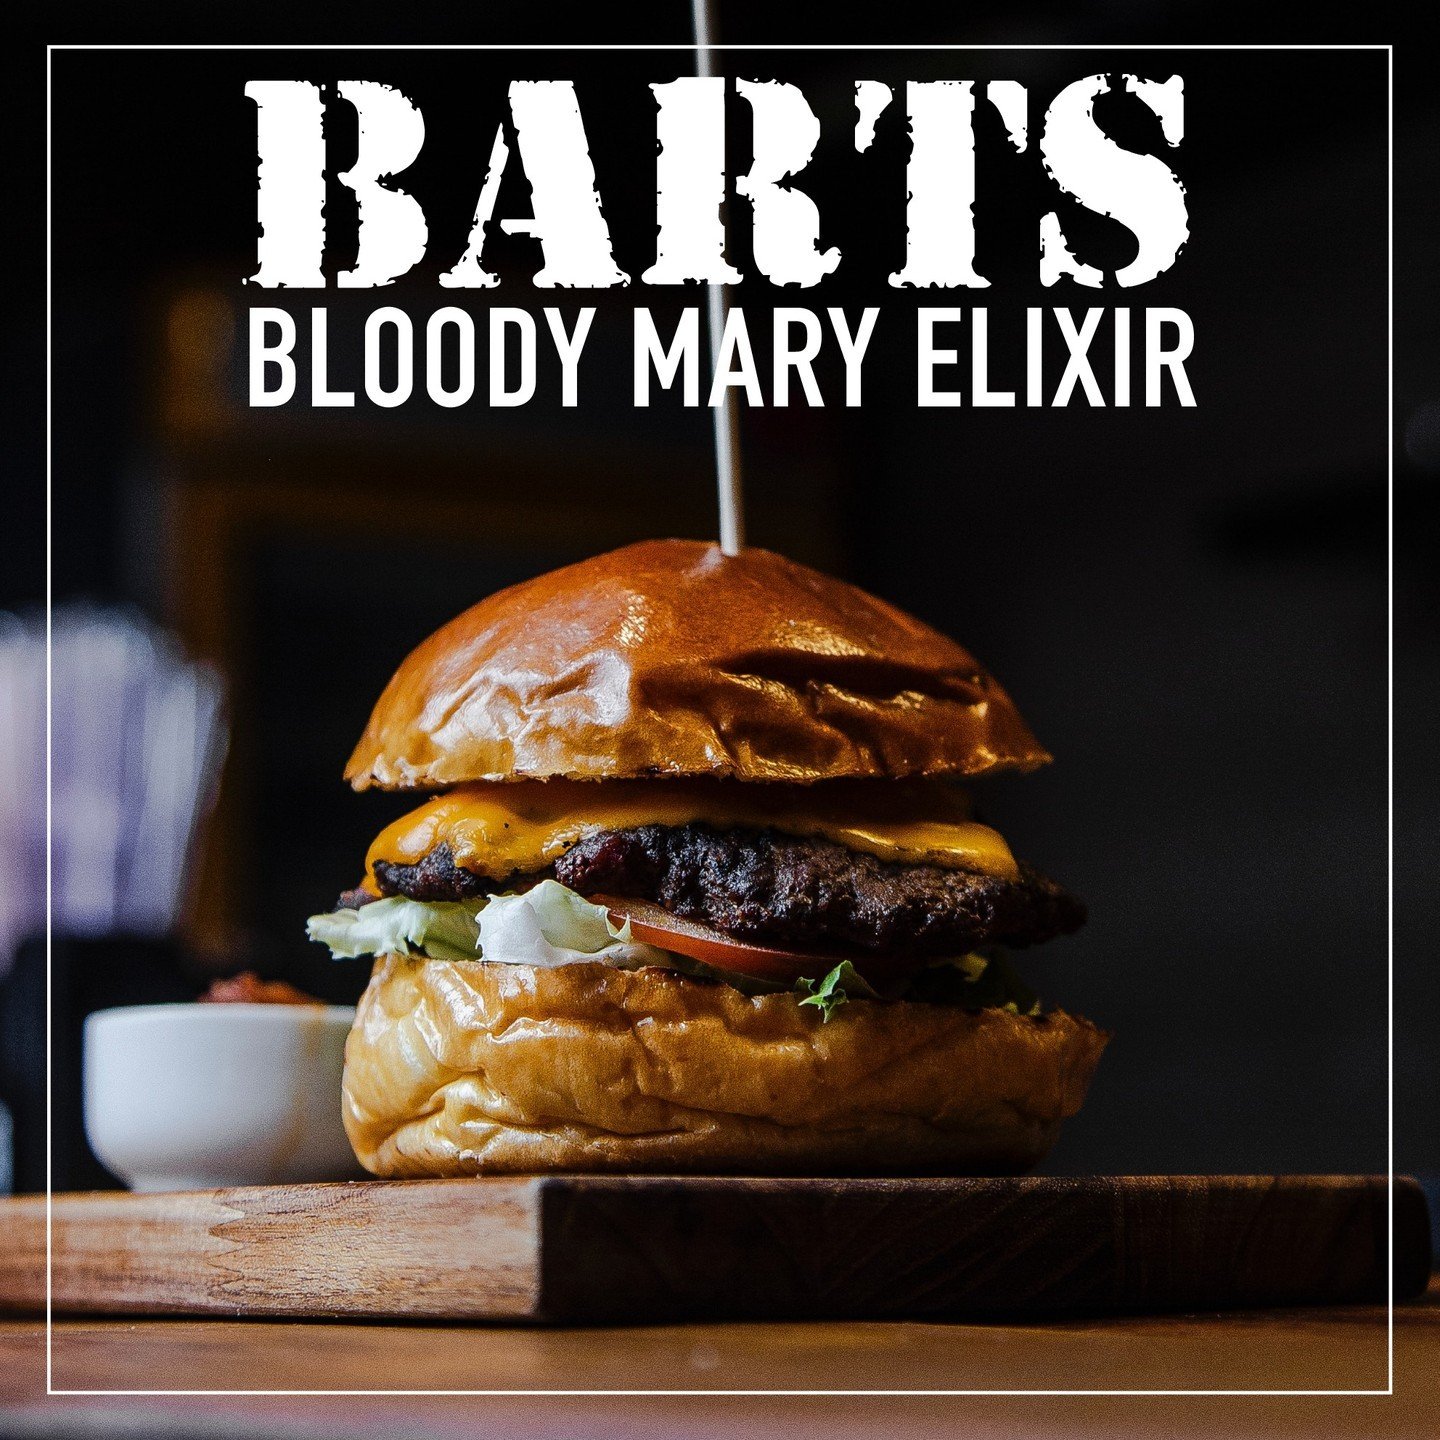 Add Barts Elixir to your favorite recipes! Our peppery elixir can substitute most seasonings in burgers, marinades, and more. Try it and let us know what you think! Order online for delivery at our link in bio. #cooking #recipes #recipe #cookingwiths